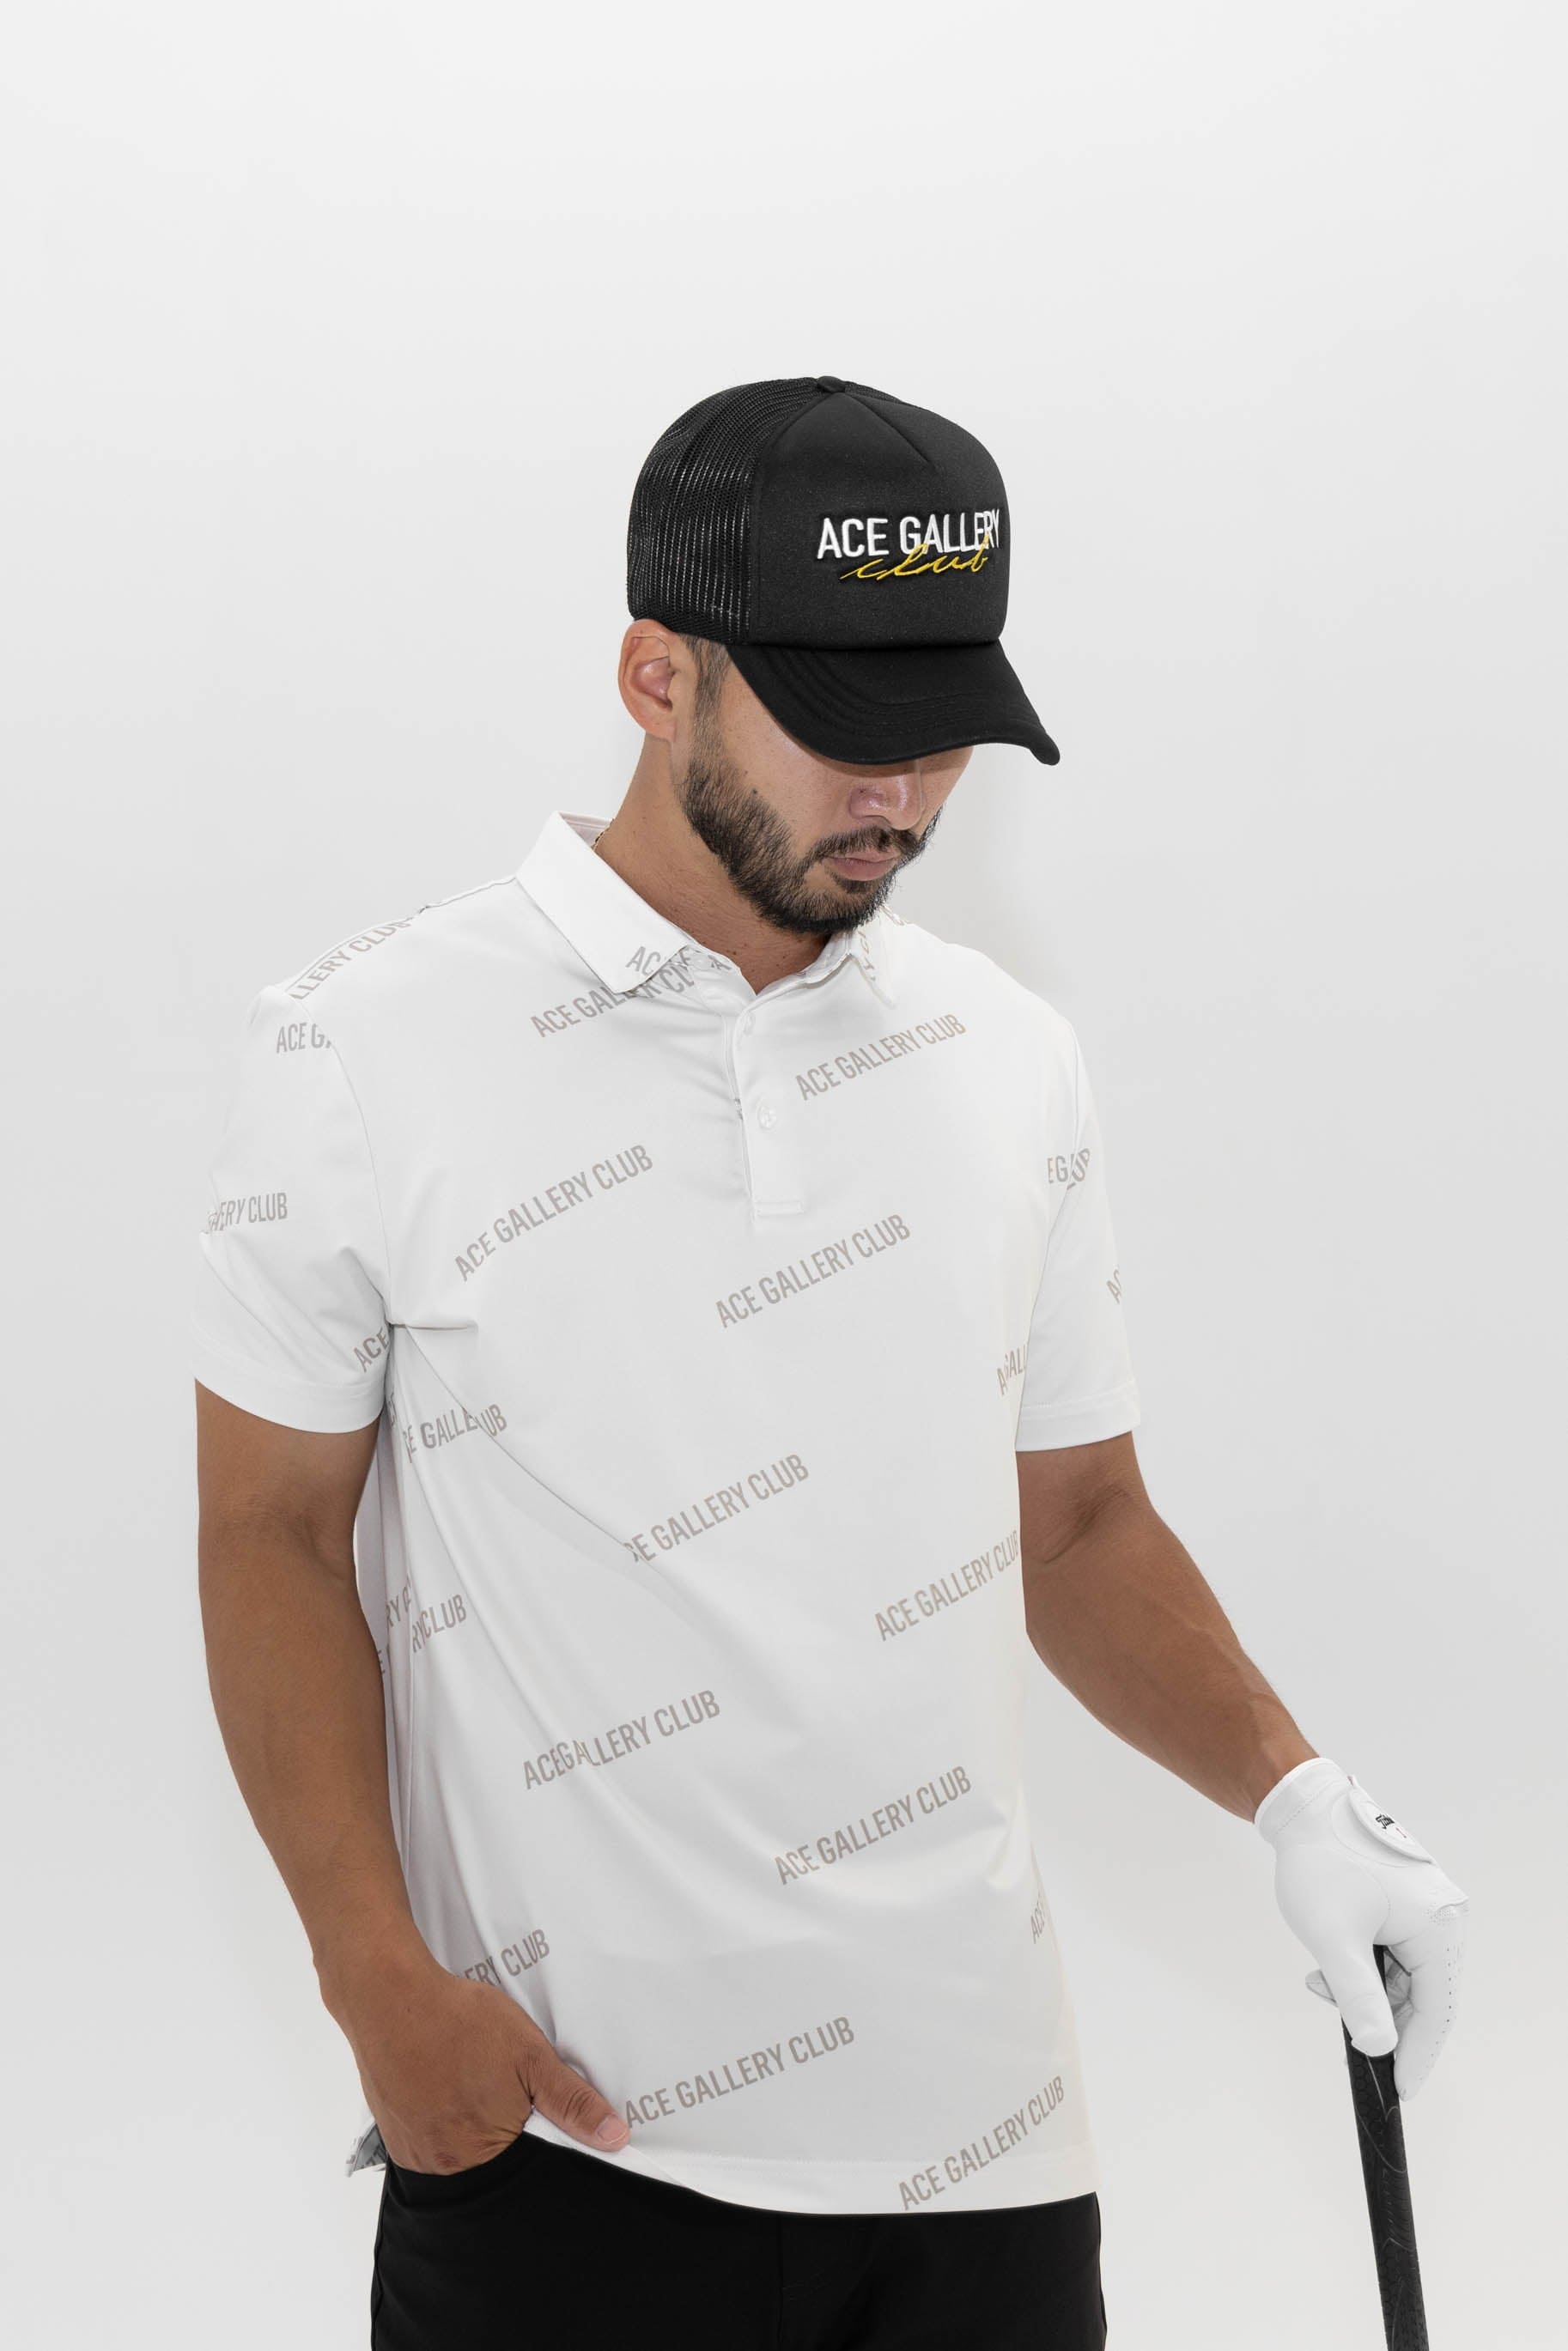 GALLERY ESSENTIAL POLO - IVORY WHITE